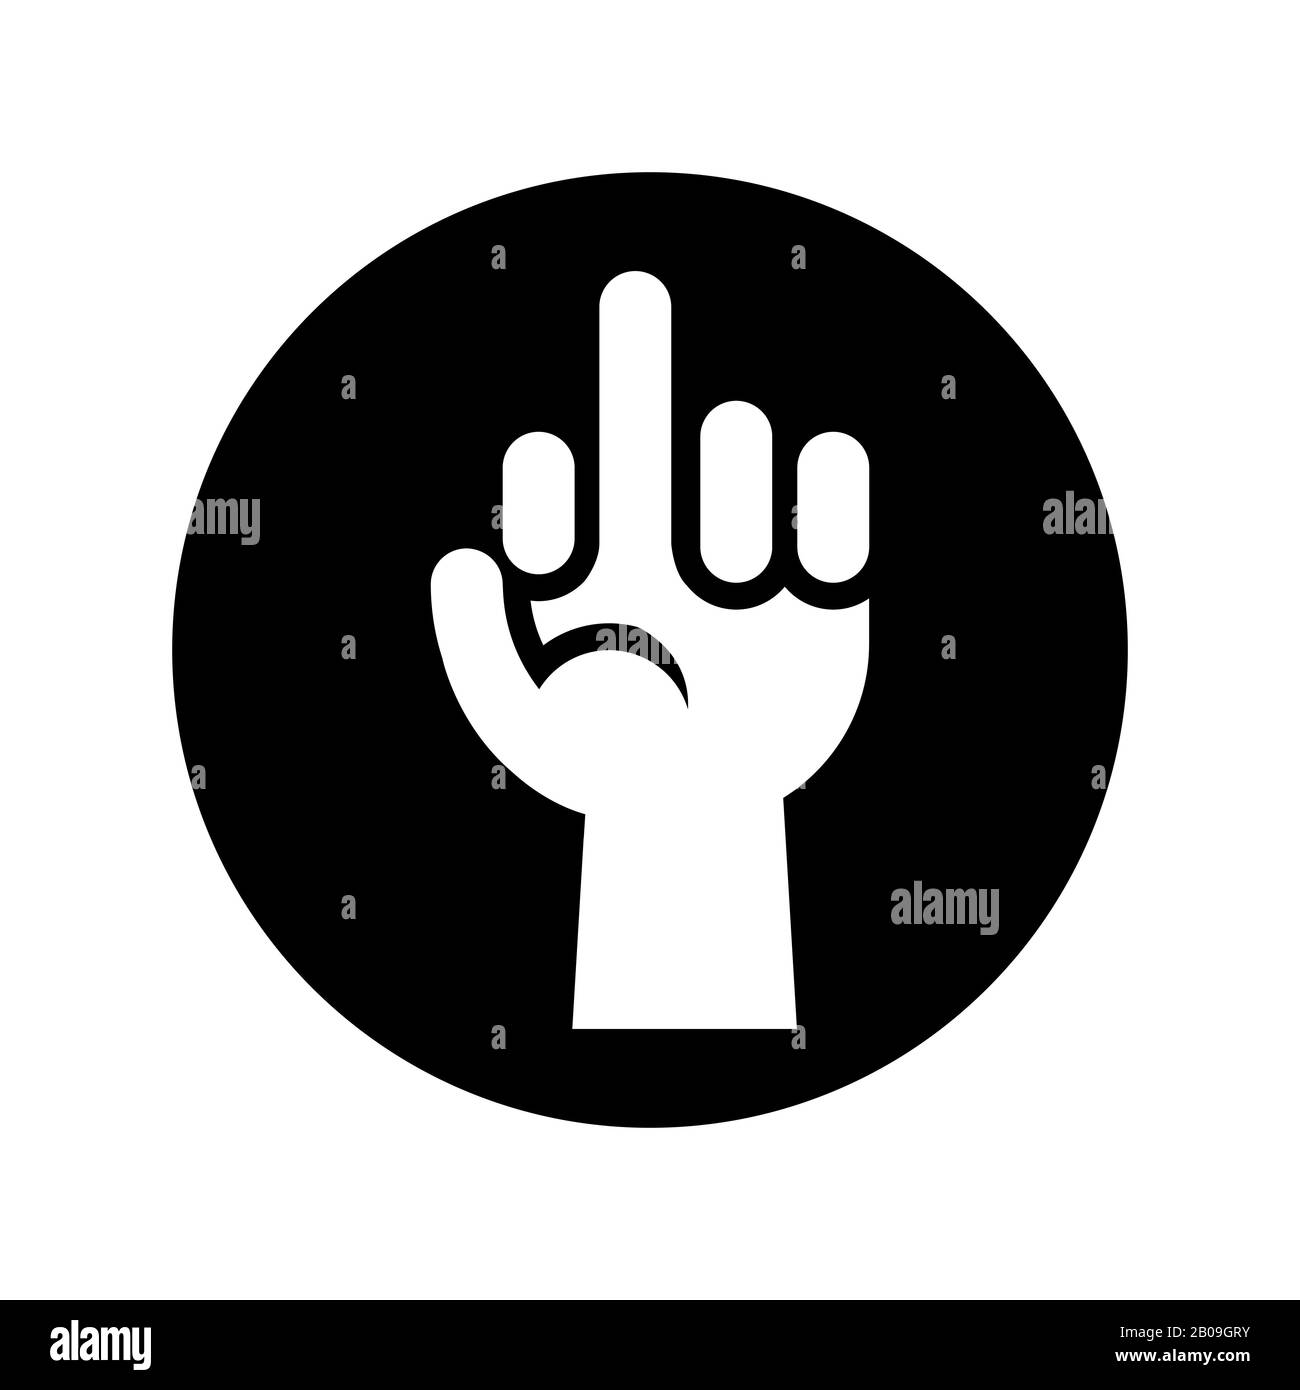 Hand showing middle finger gesture icon in black over white. Symbol of communication design illustration Stock Vector